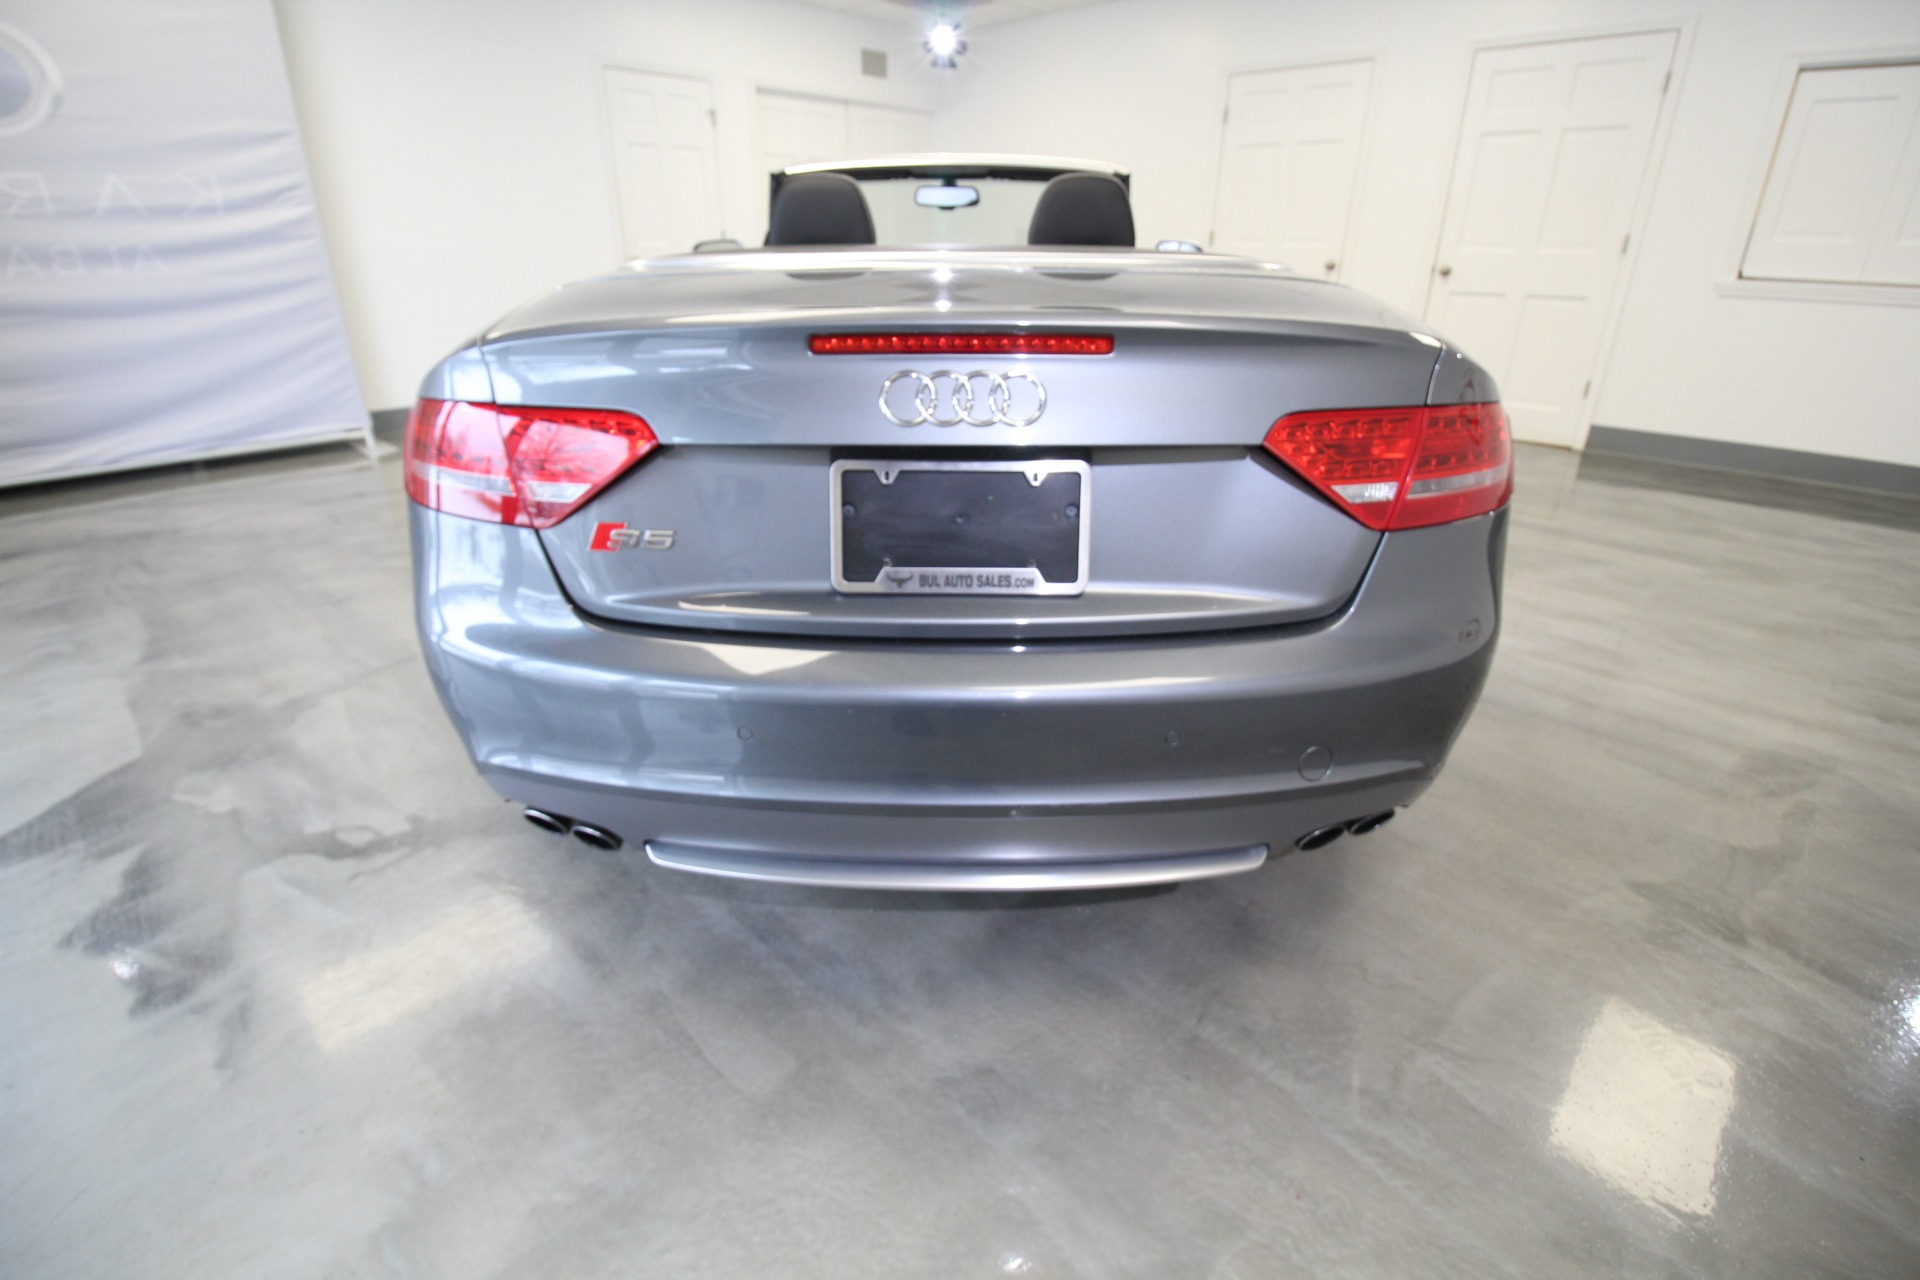 Used 2012 Monsoon Gray Metallic with Black Soft Convertible Top Audi S5 3.0T Cabriolet quattro S tronic | Albany, NY